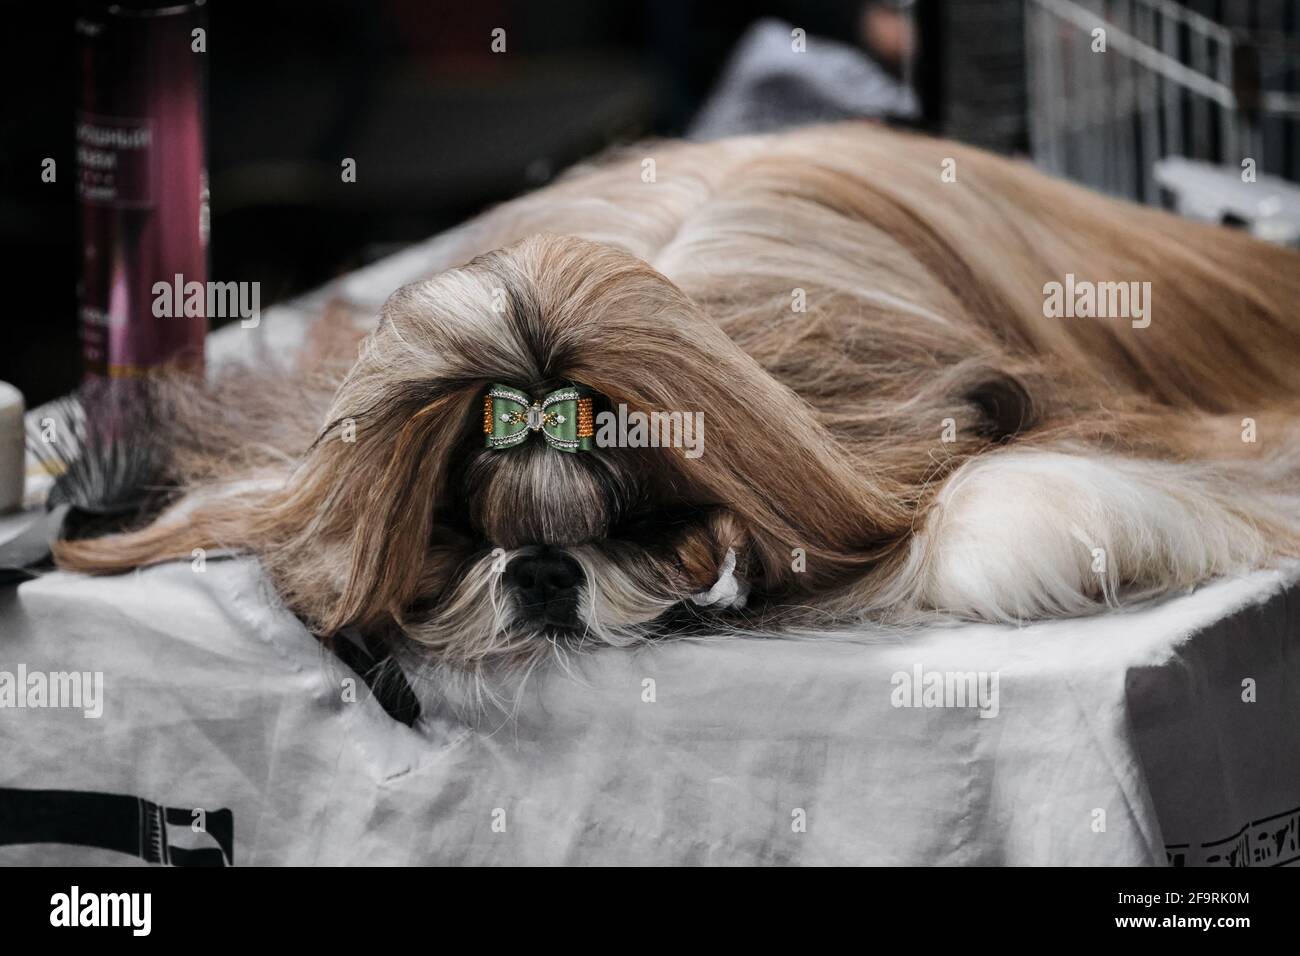 A Shih tzu with long, silky hair and a green bow on top of her head lies asleep on a grooming table. Portrait of a thoroughbred dog from a dog show cl Stock Photo